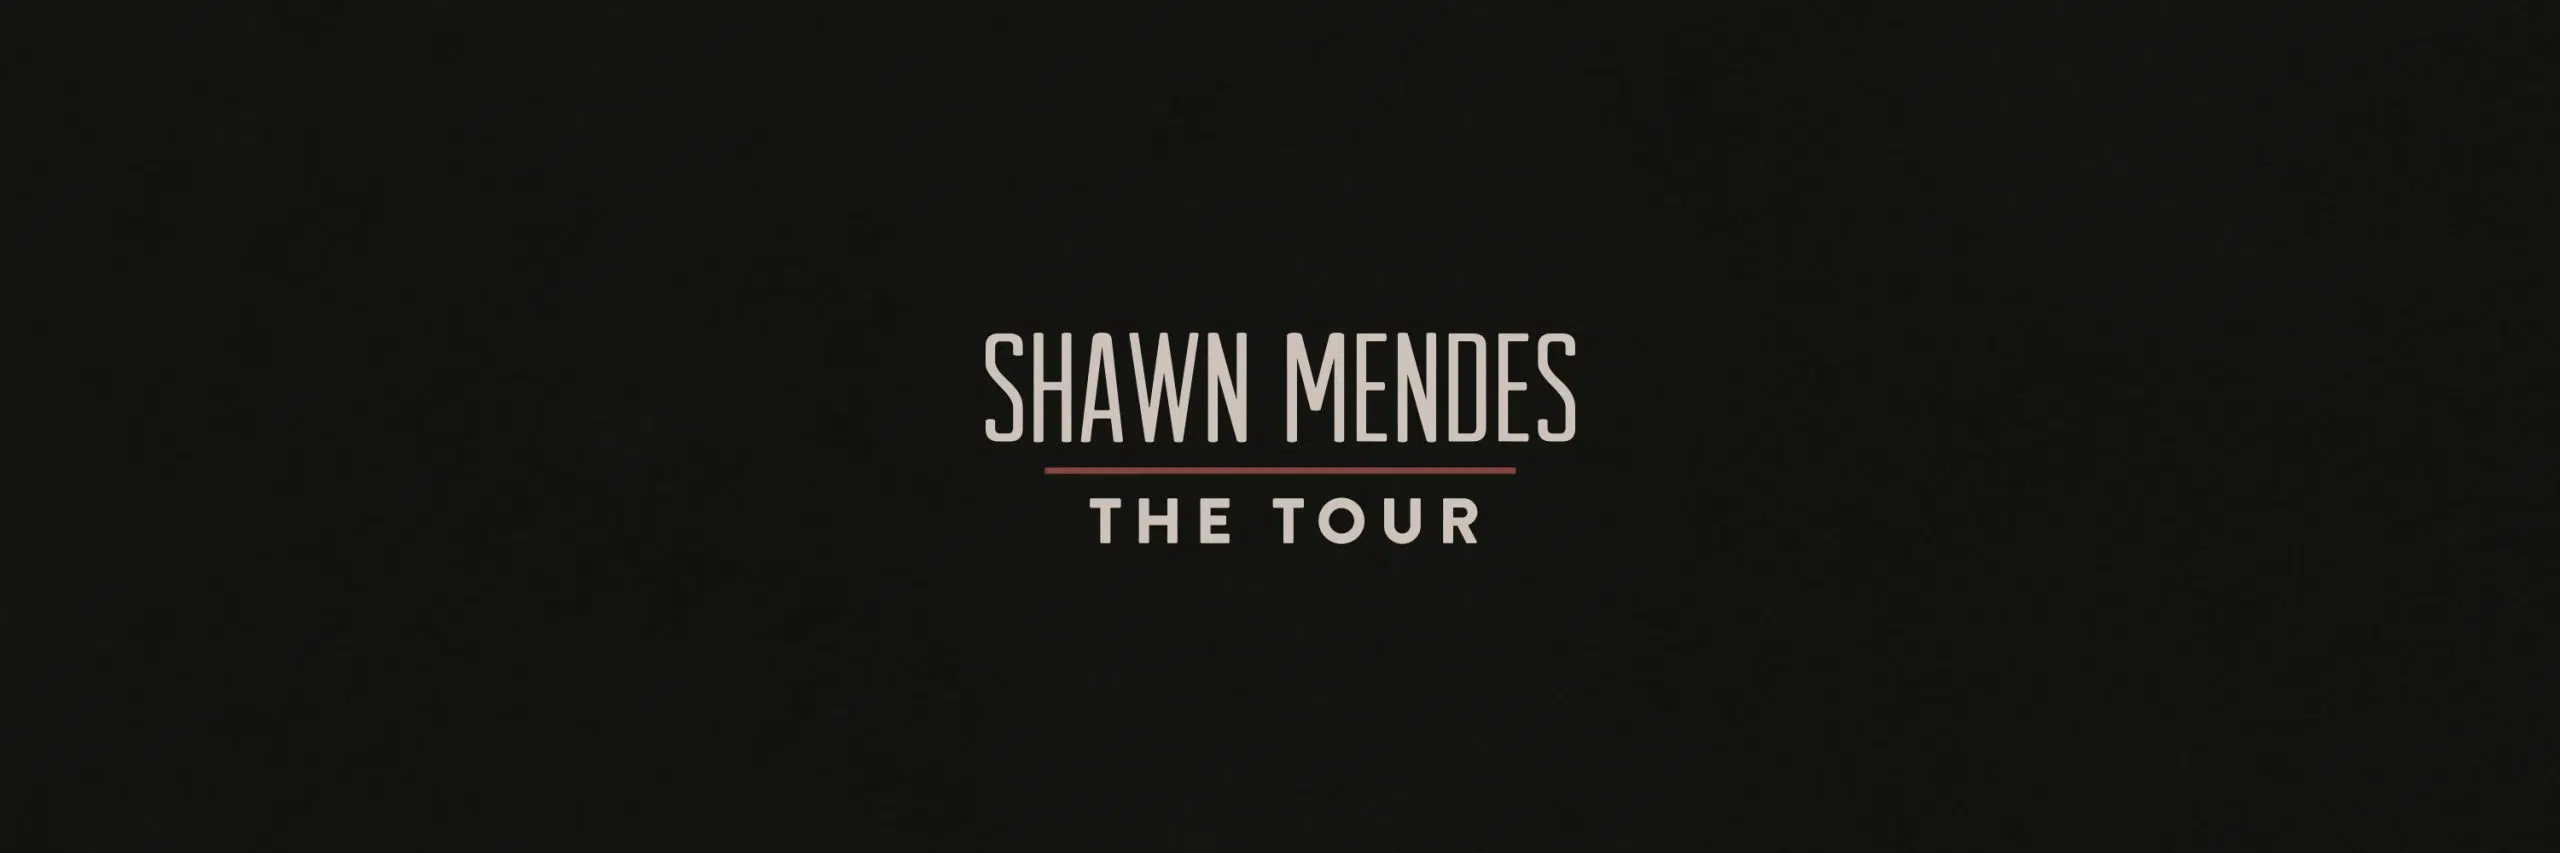 New Shawn Mendes Music This Friday